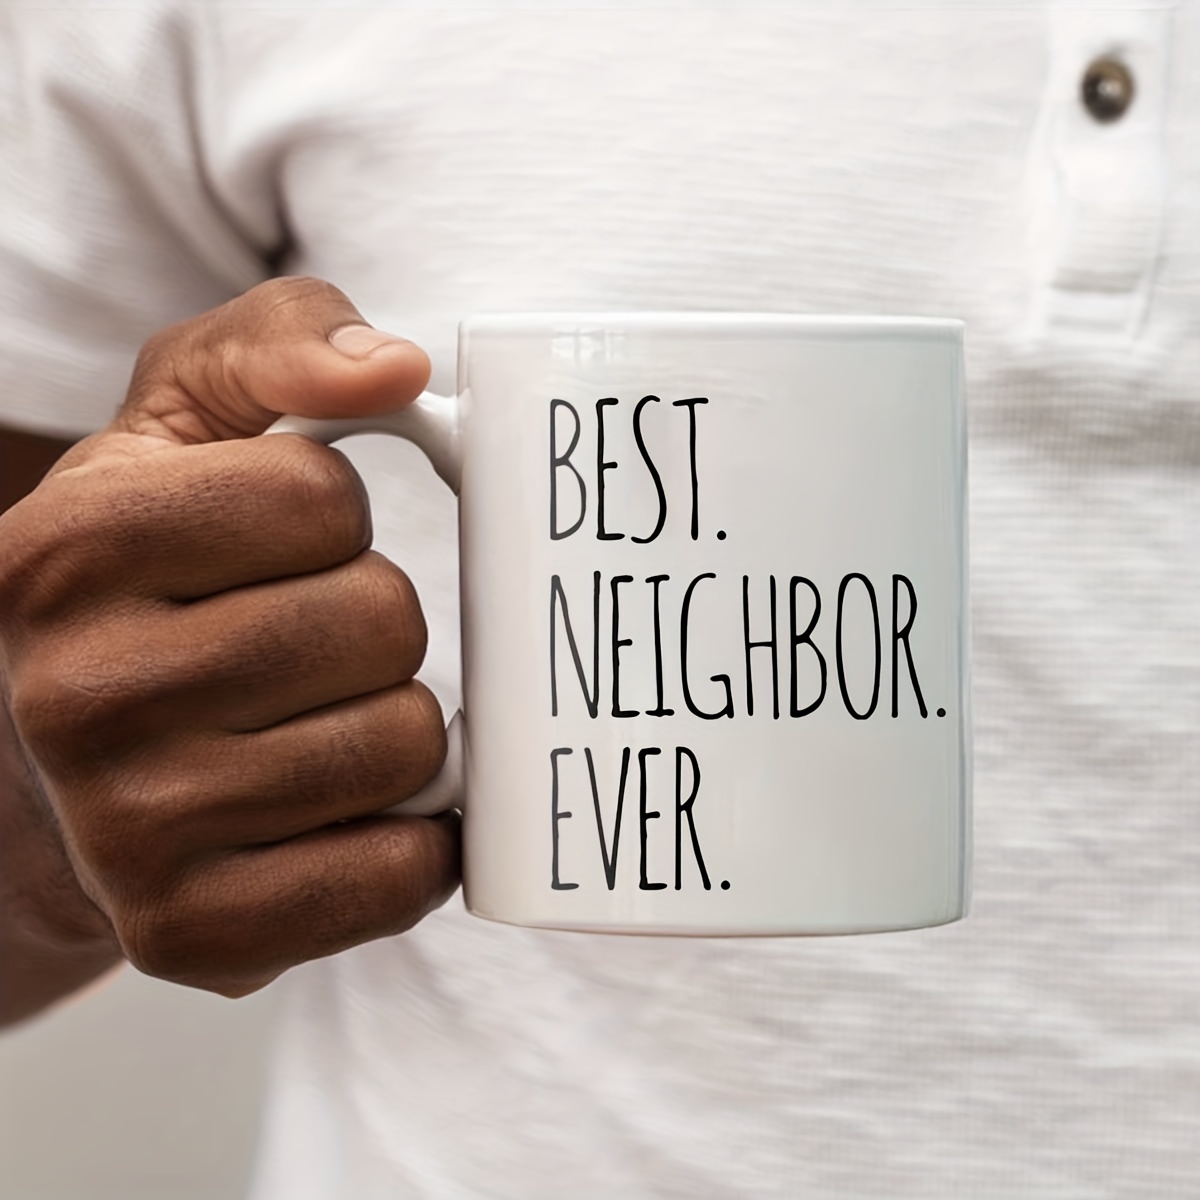  Thanks for Being an Awesome Neighbor - Neighbor Gift for New  Home, Farewell or Moving Away Gifts. Christmas Gifts for Neighbors,  Housewarming Present for Women Men, Best Neighbor Ever, Made in